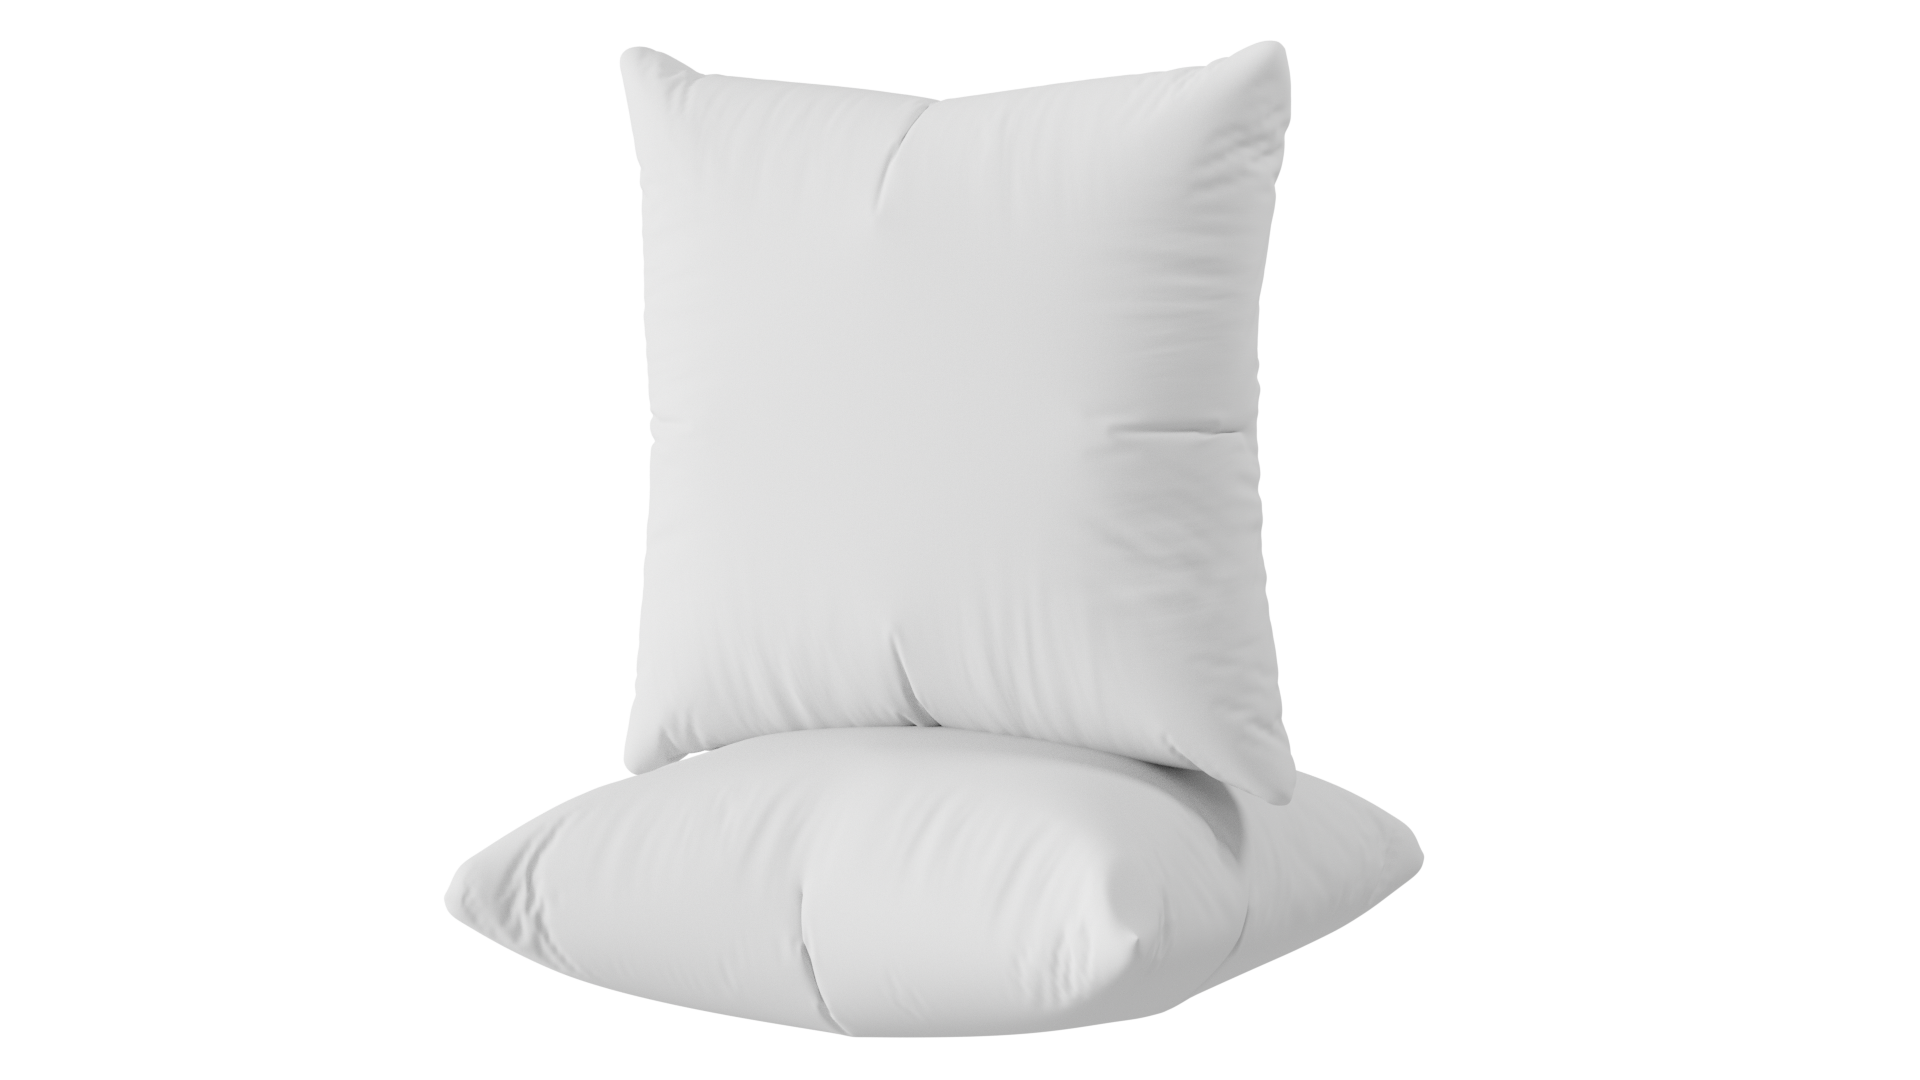  Utopia Bedding Throw Pillows Insert (Pack of 2, White) - 12 x  12 Inches Bed and Couch Pillows - Indoor Decorative Pillows : Home & Kitchen